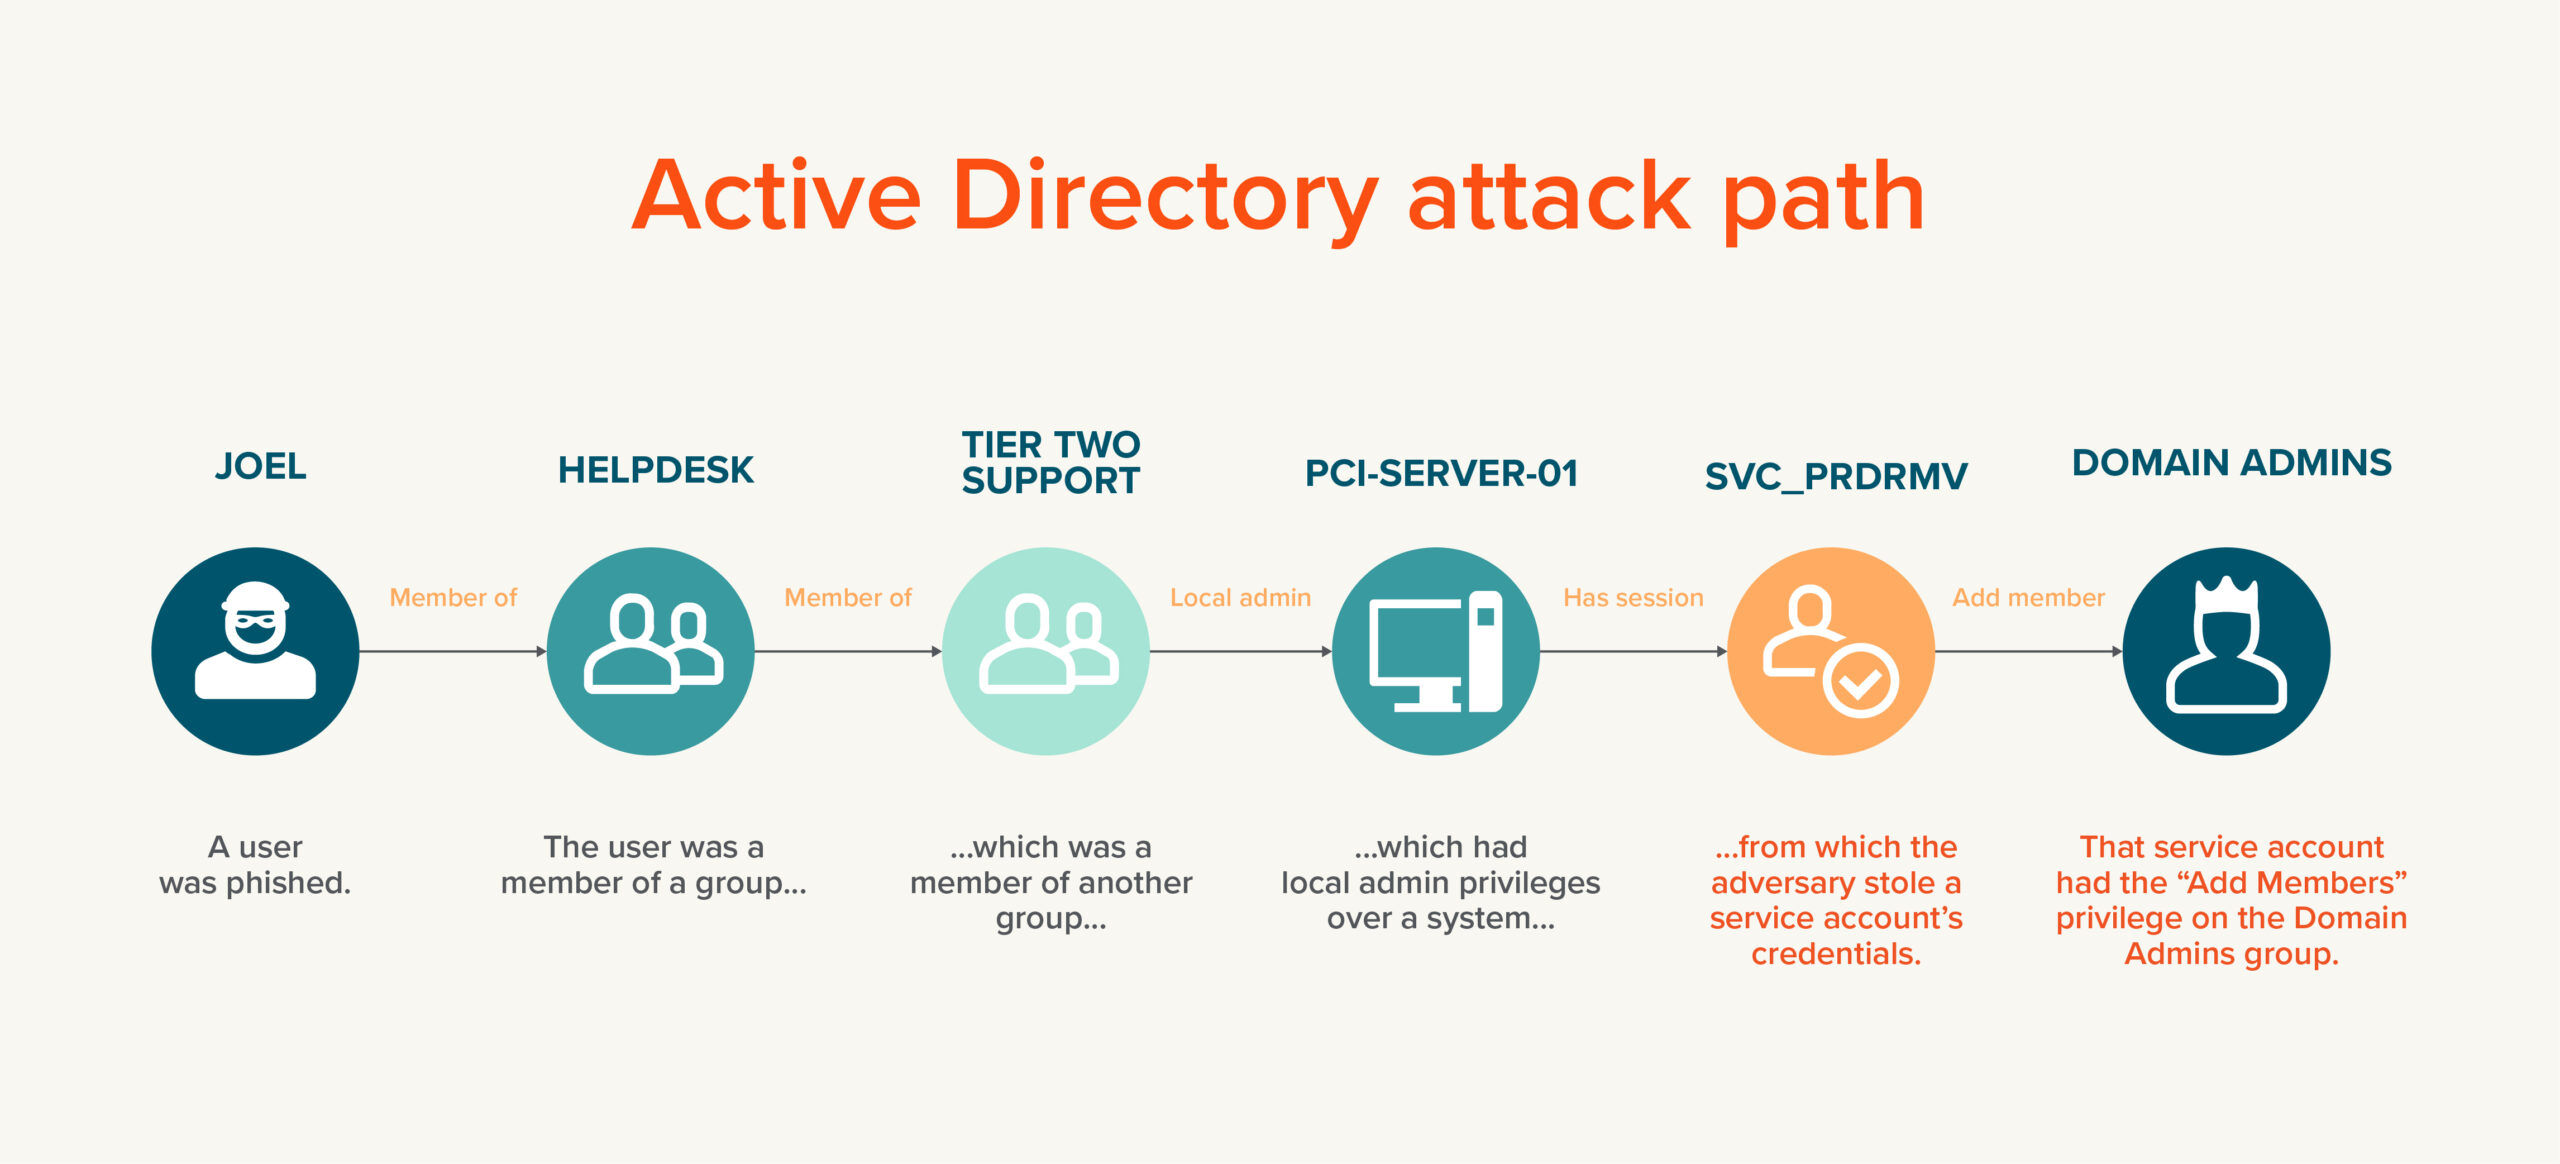 Active Directory attack paths: How they work 